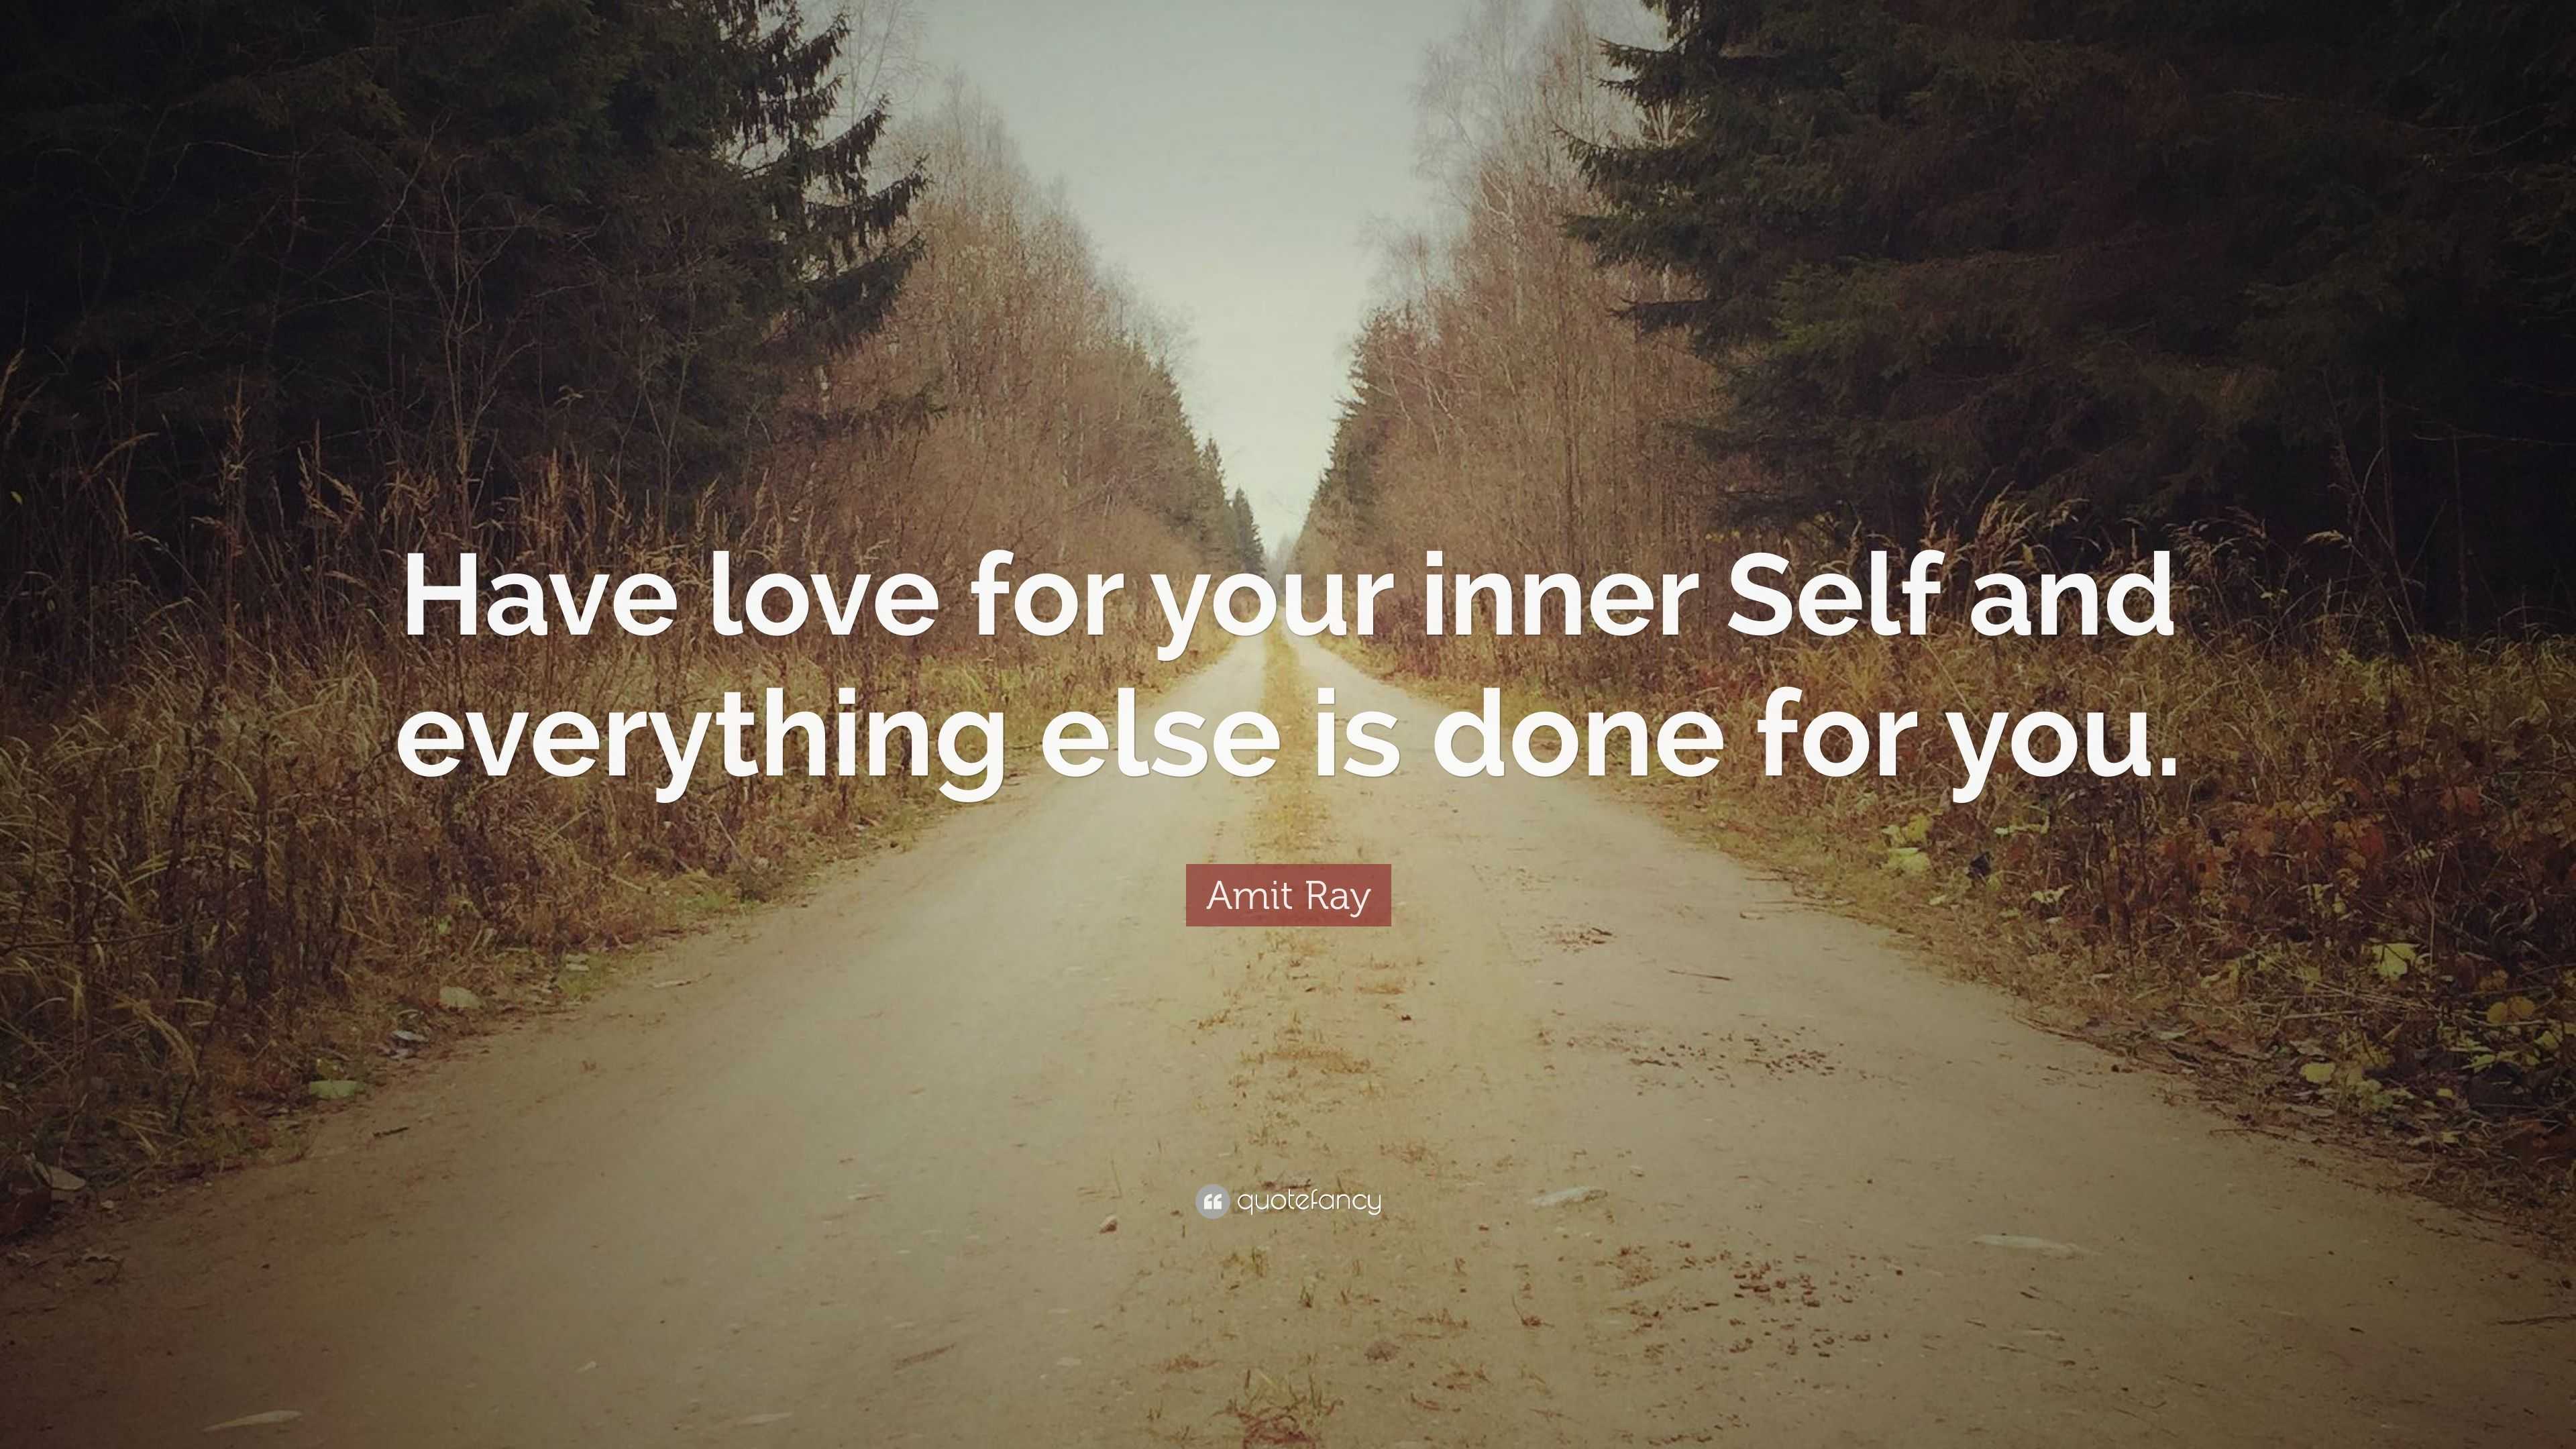 Amit Ray Quote: “Have love for your inner Self and everything else